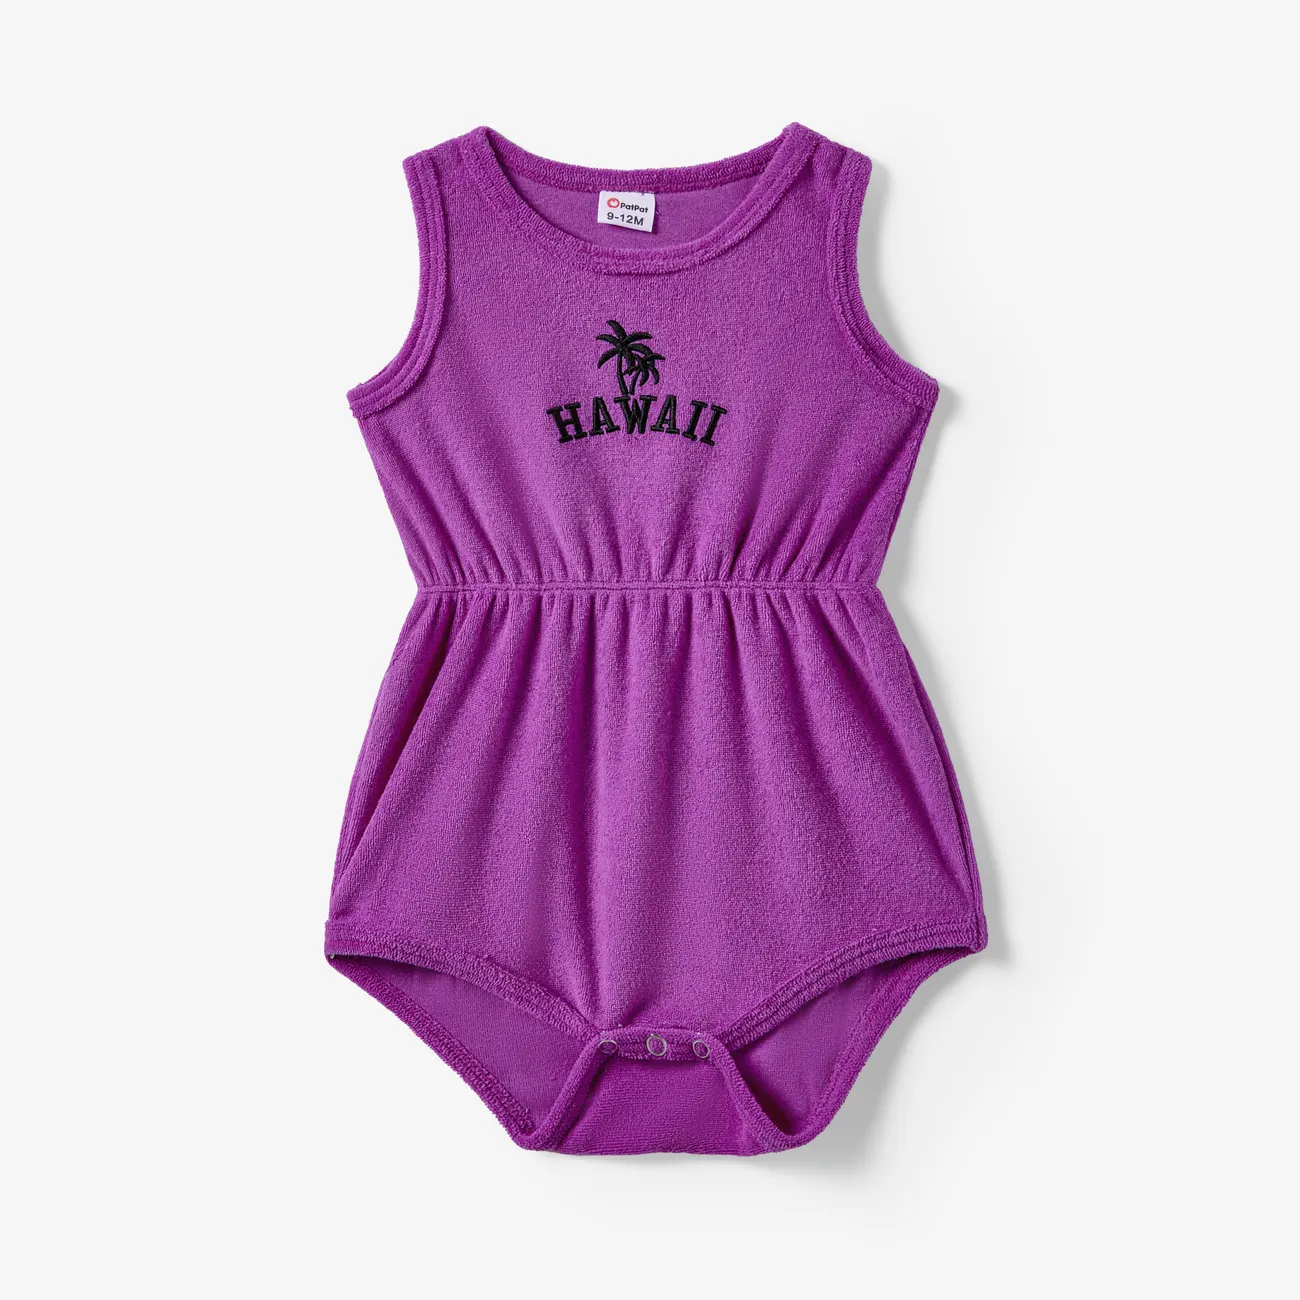 Mommy and Me Purple Embroidery Terry Tank Body-con Dresses  Purple big image 1